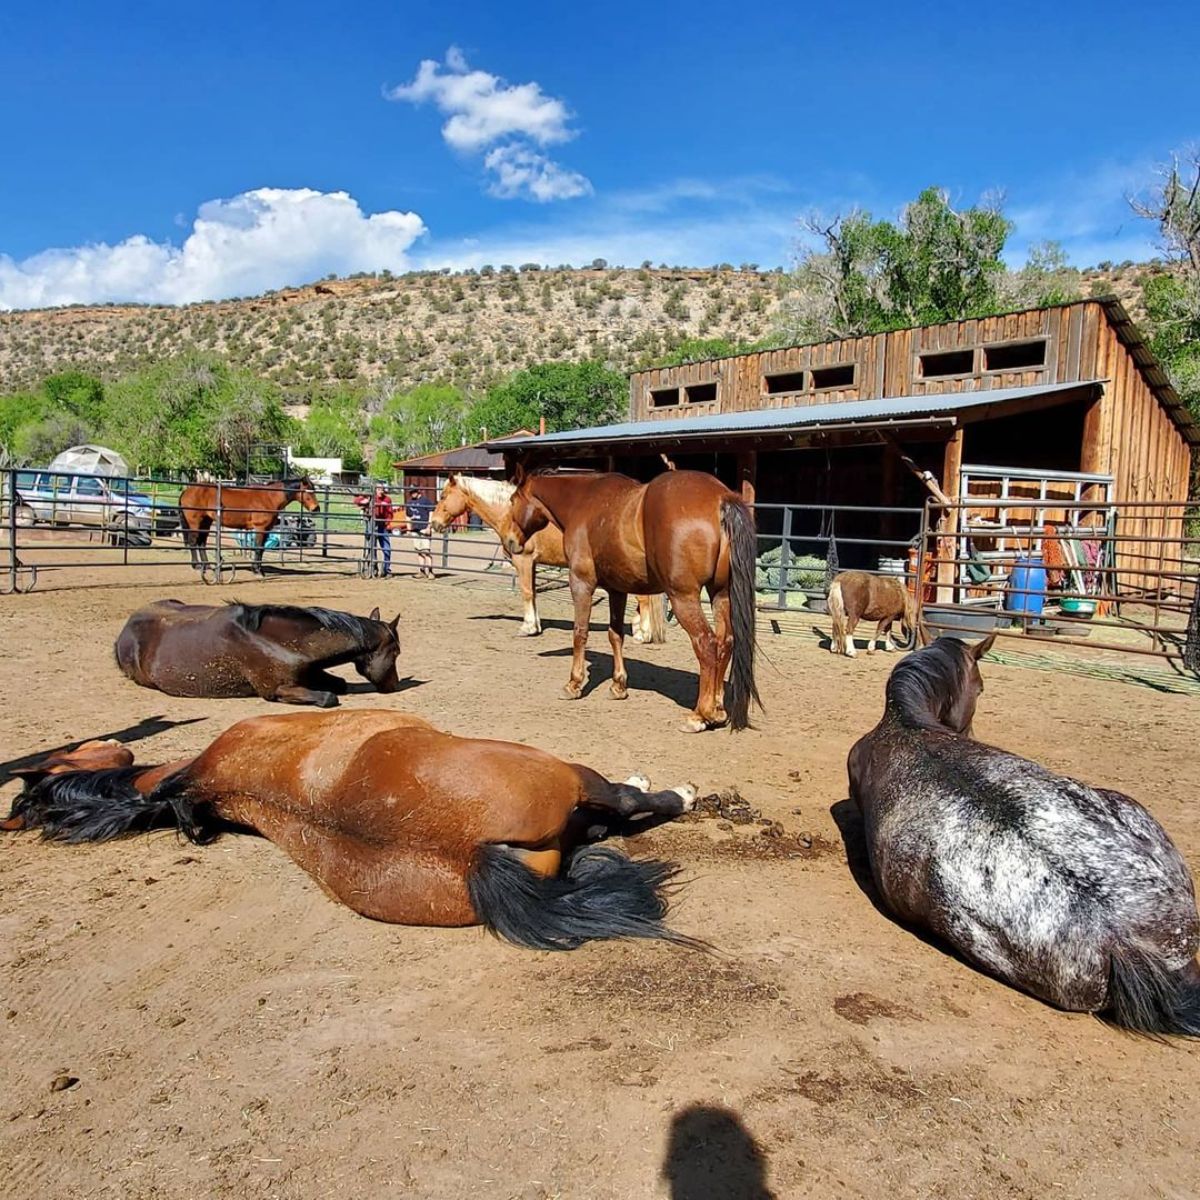 A bunch of horses waking up from sleep on a ranch.